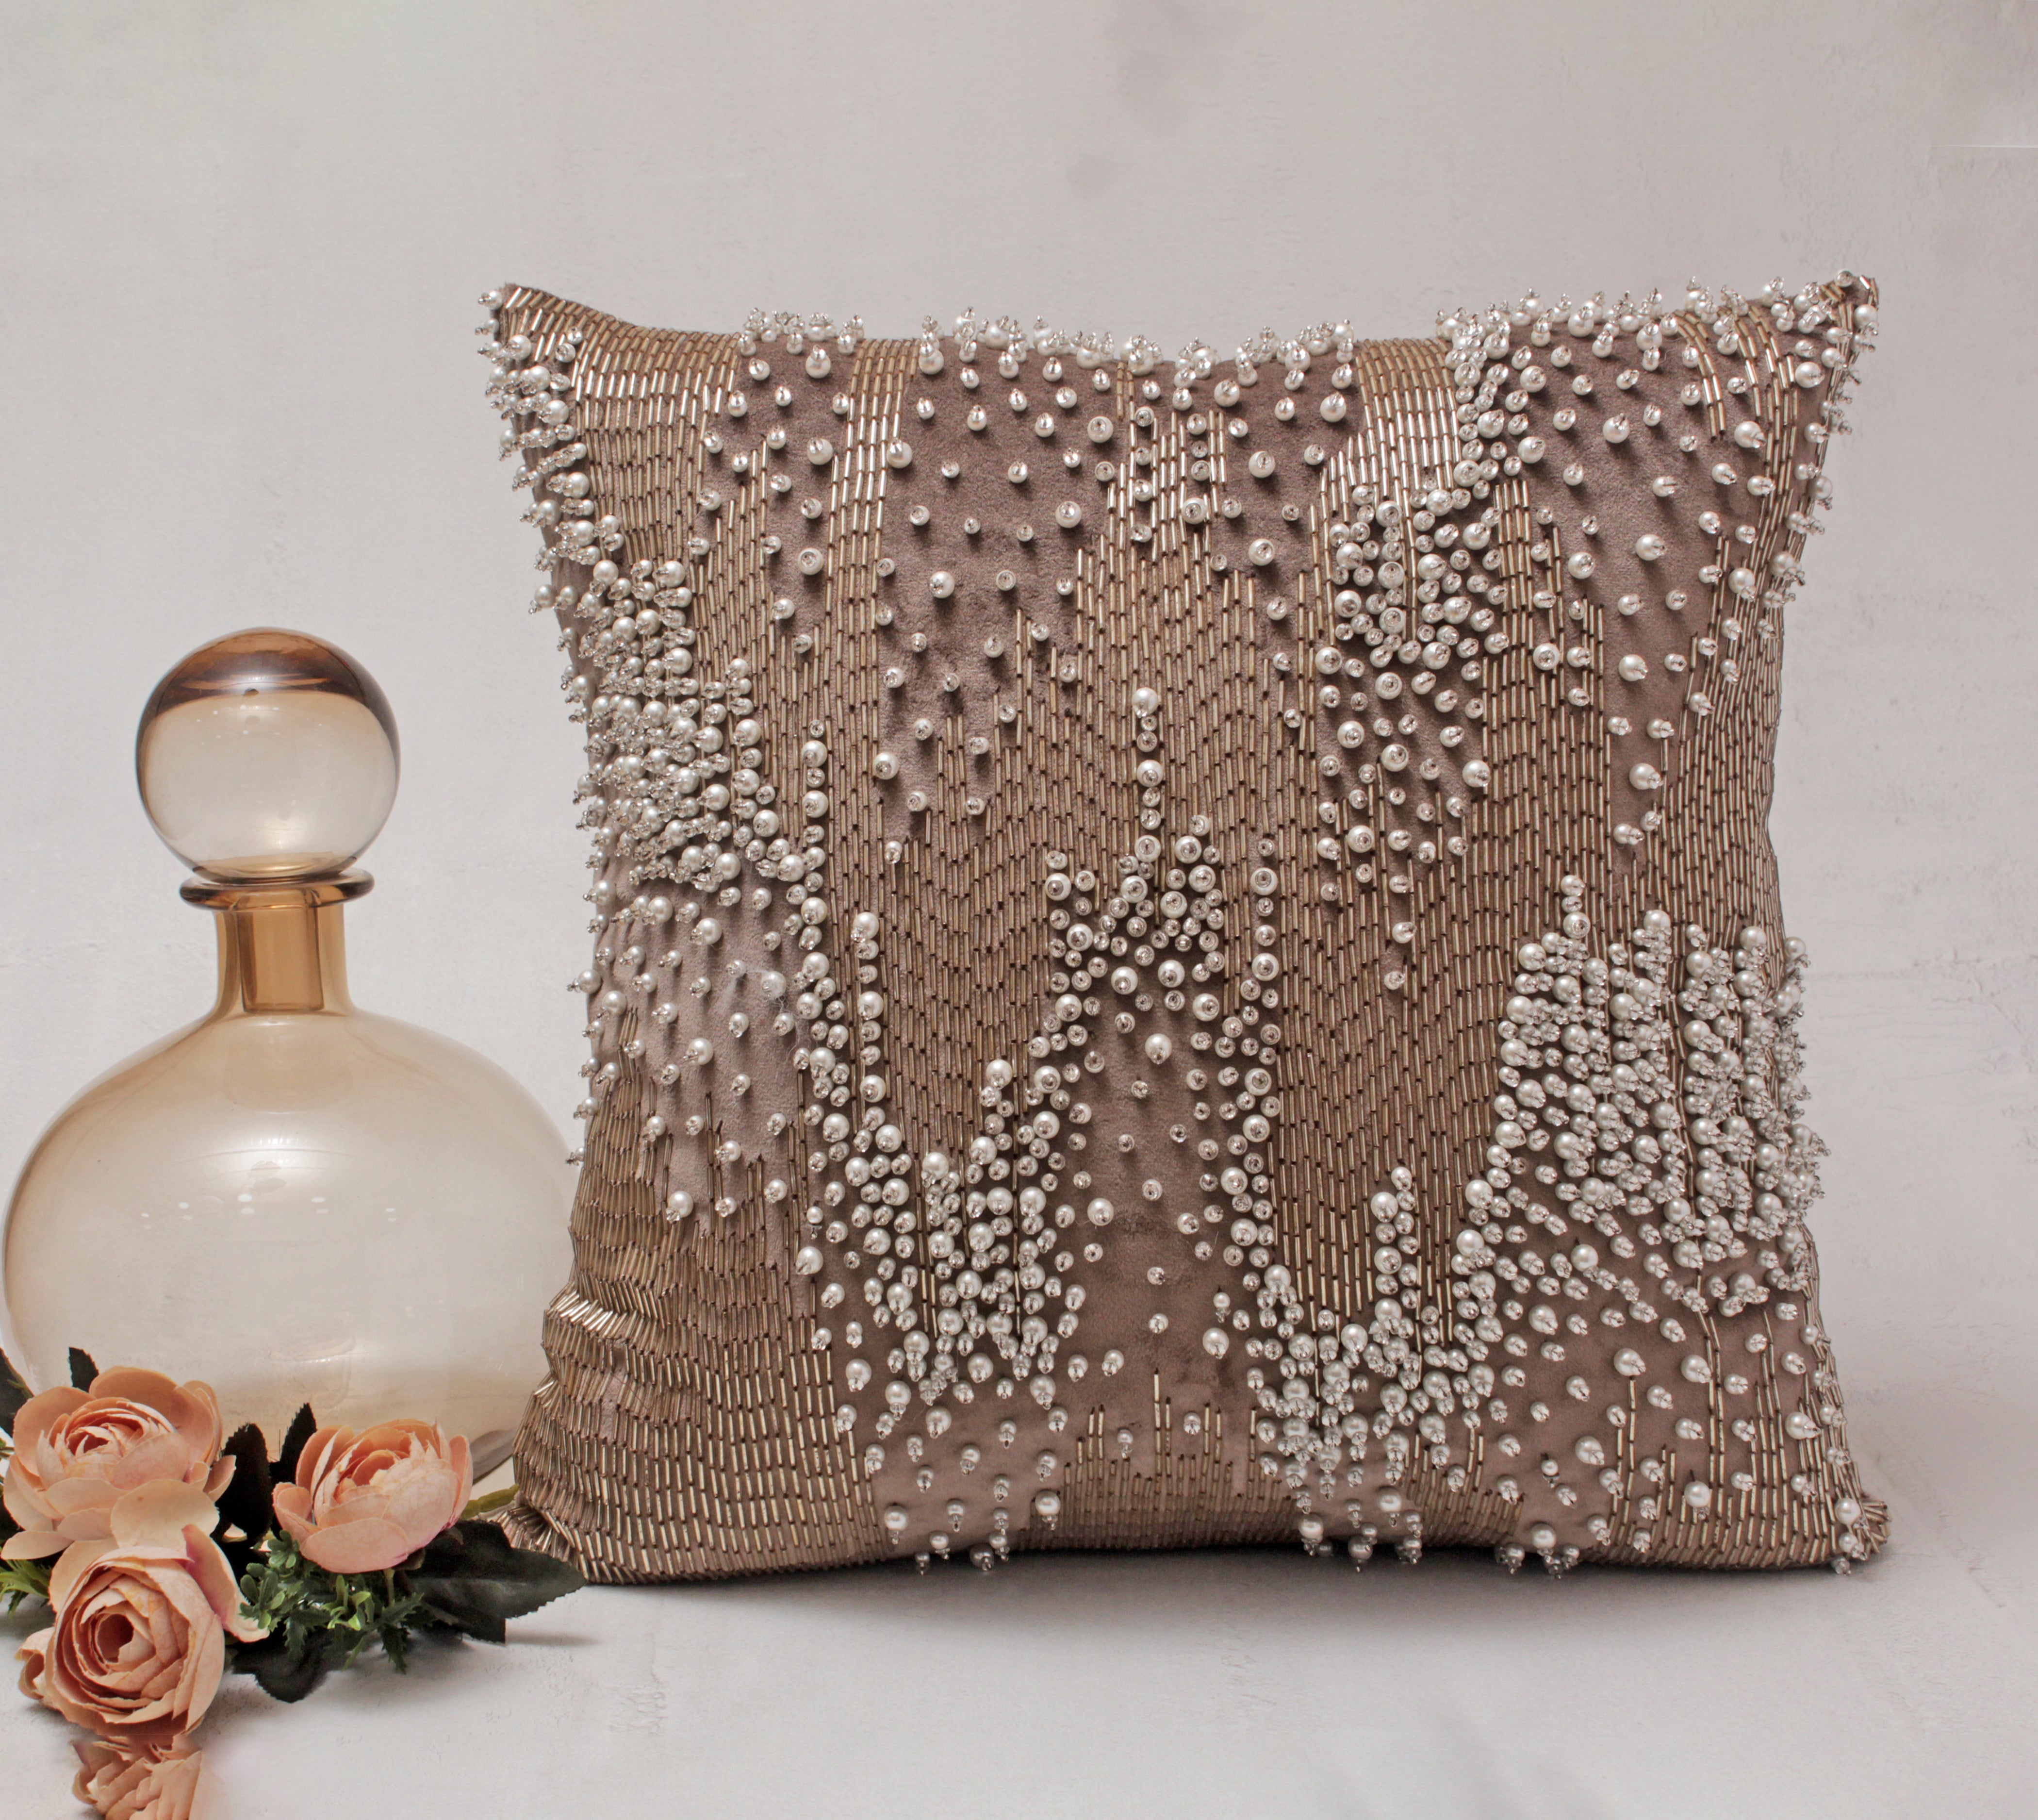 The combination of long Glass rods, pearl and crystals in the shades of rosegold and Off-white are used to create a 3 dimensional abstract pattern in an exclusively unique form in the XENIA Cushion Cover.